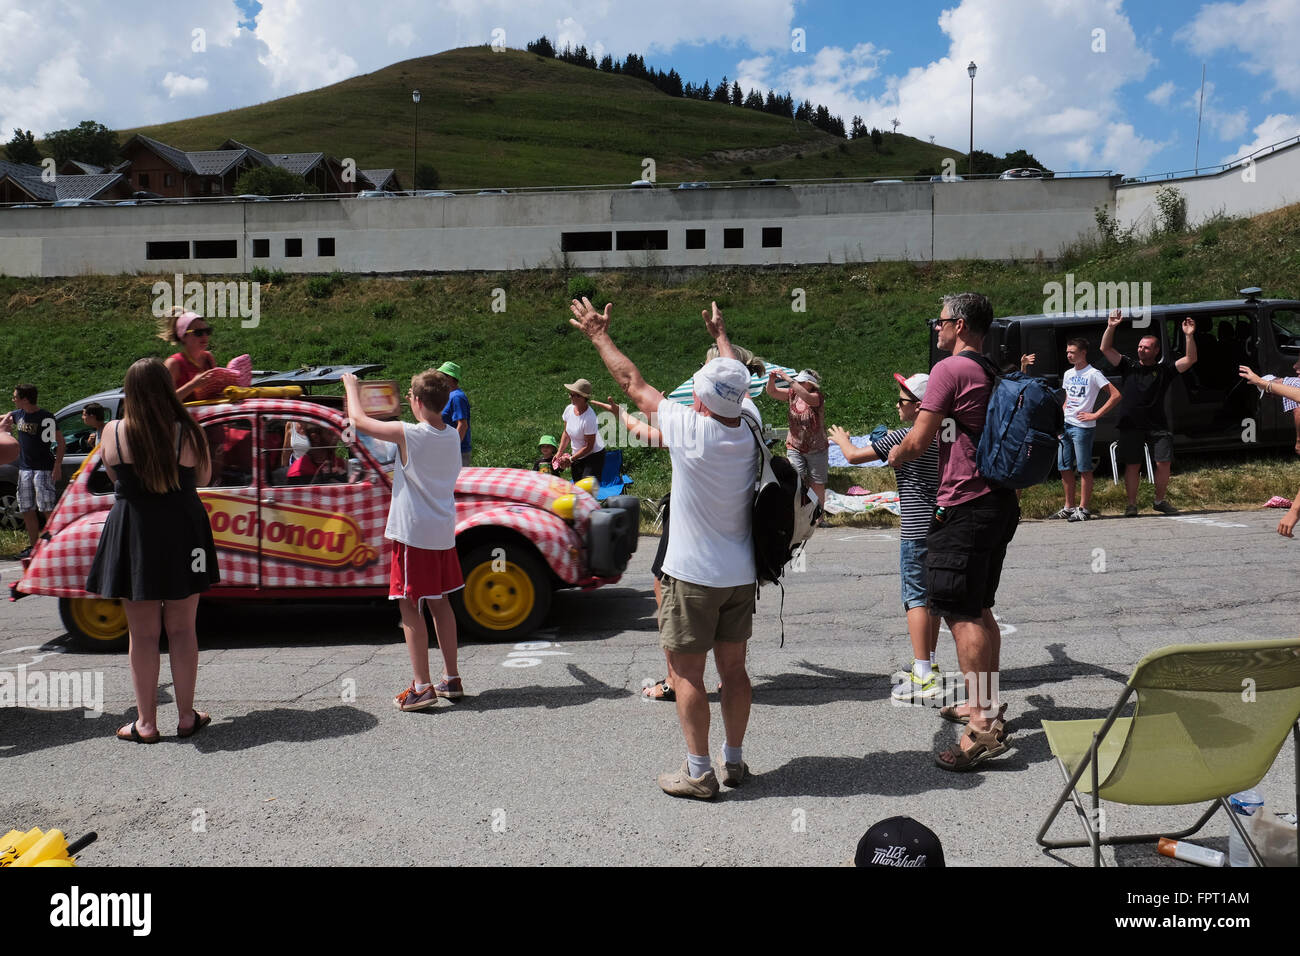 Tour de France spectators waiting for commercial presents from the sponsors in the caravan cars Stock Photo